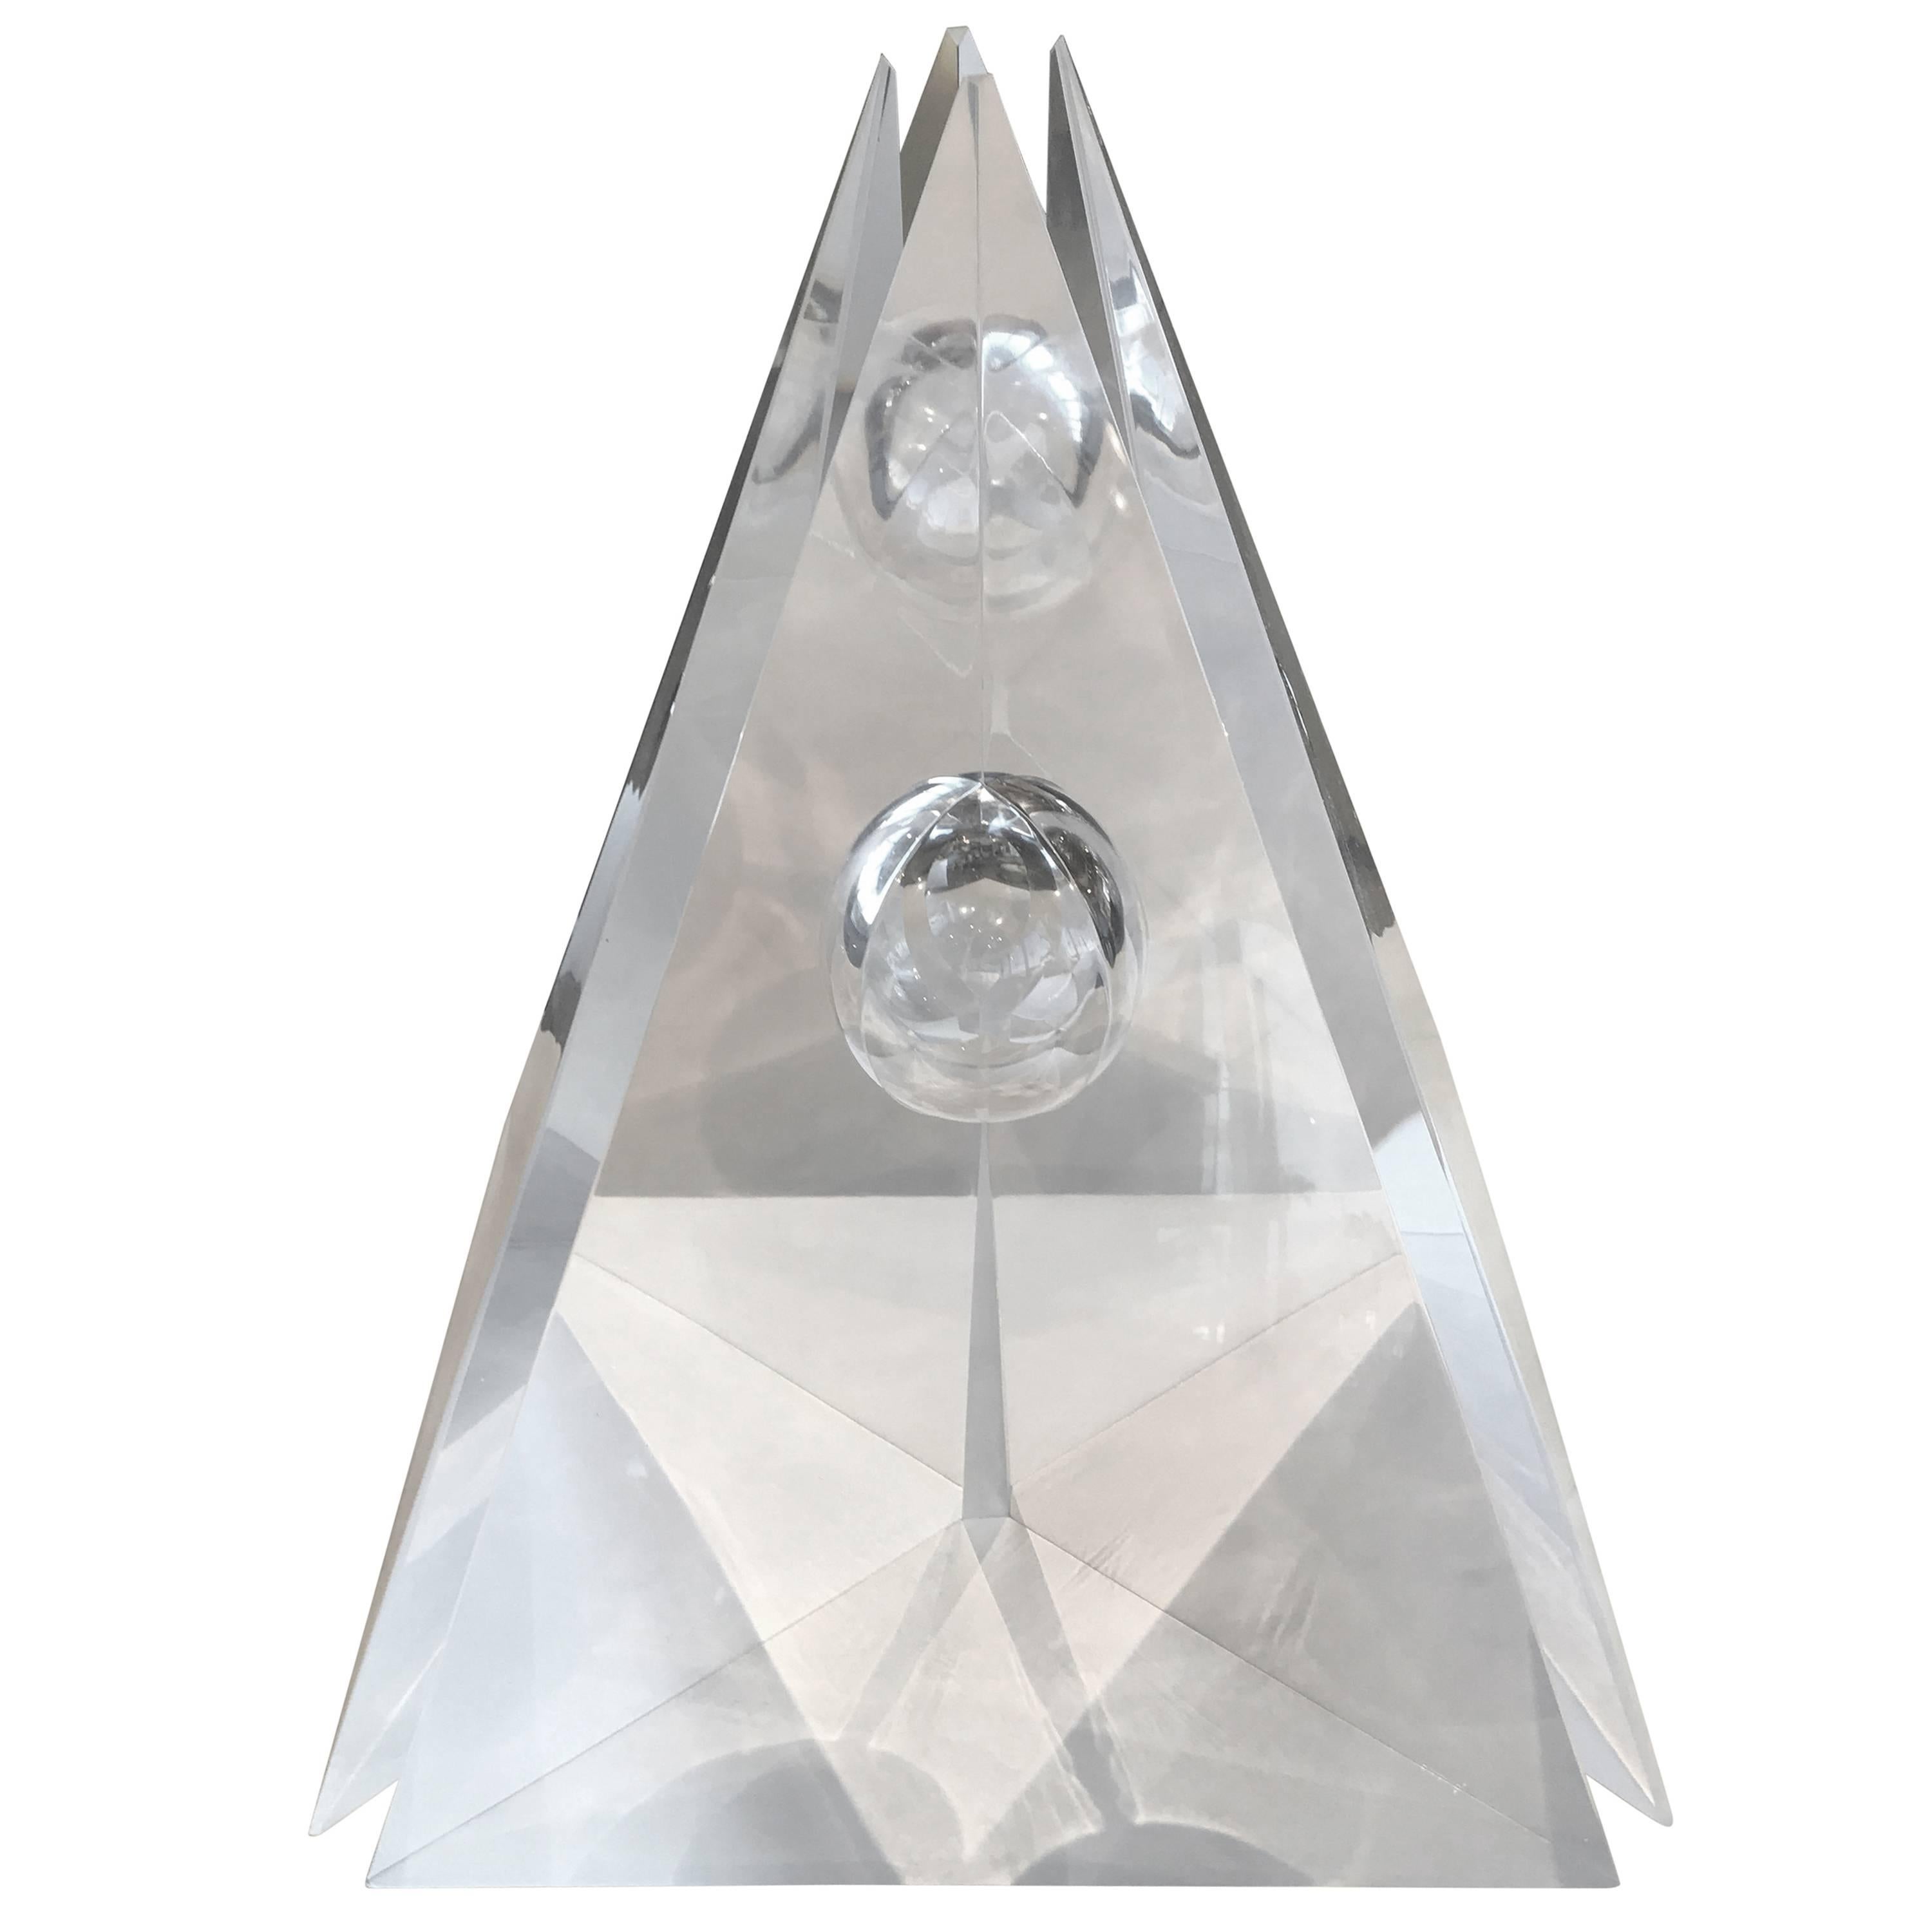 “Eye of the Pyramid” in lucite